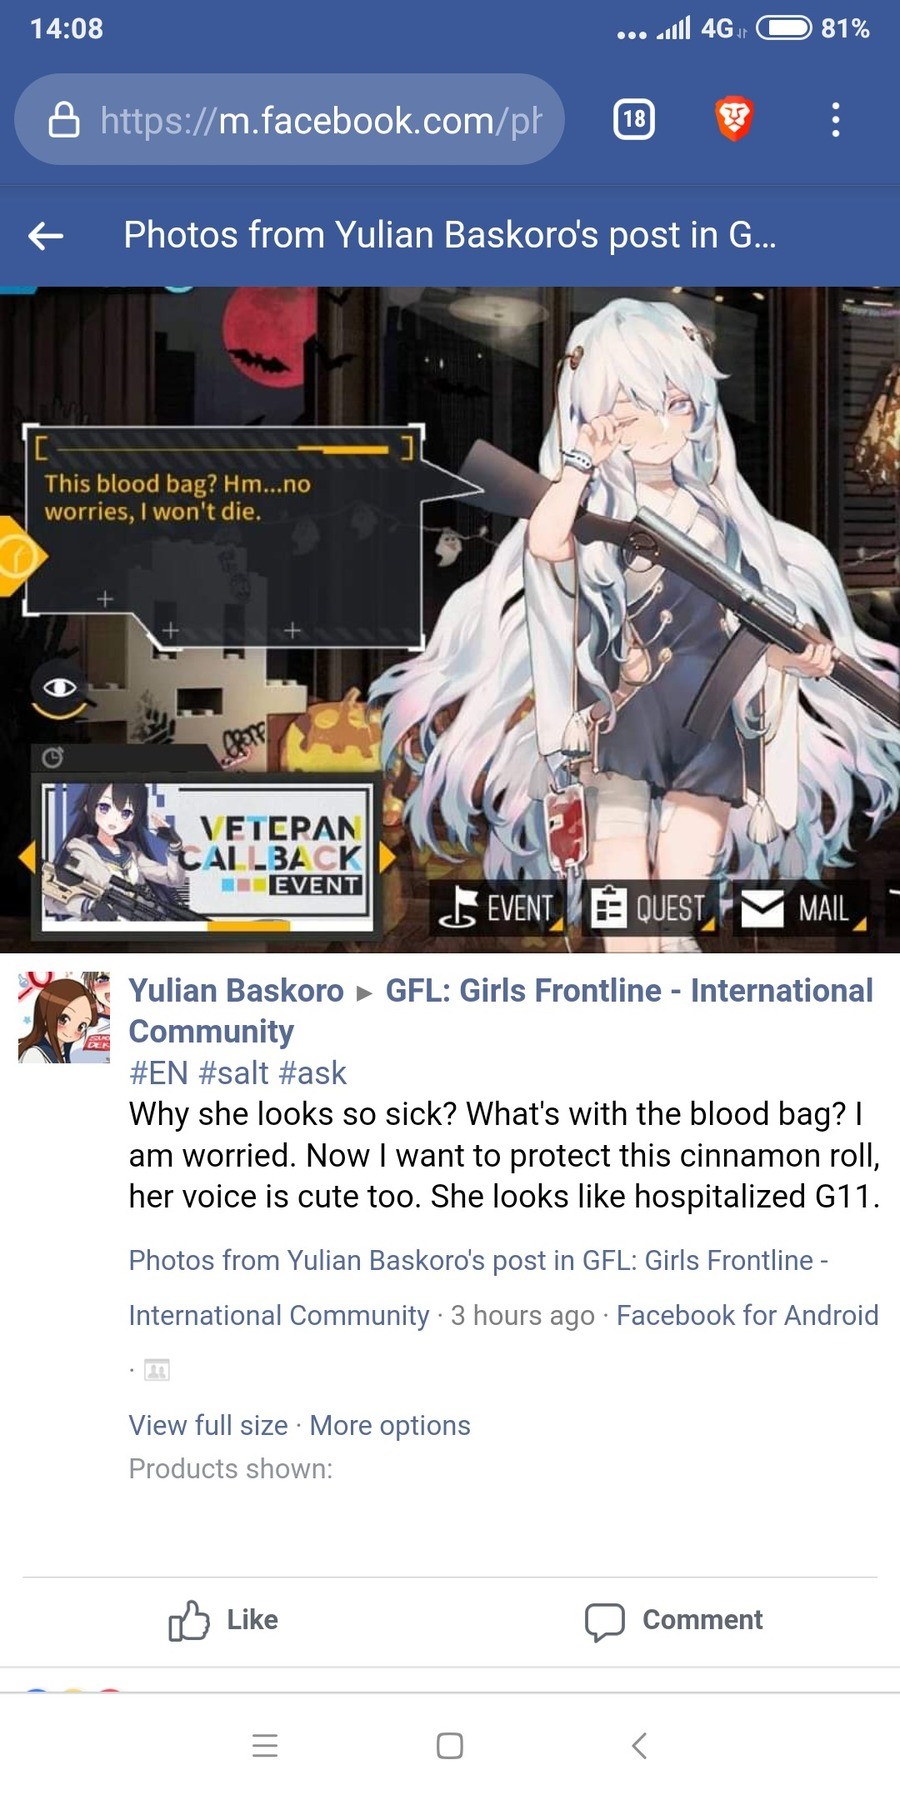 Hospitalized raifu. join list: GirlsFrontline (620 subs)Mention Clicks: 151180Msgs Sent: 627924Mention History Do I event want to send her to fight? .. Ofcourse It's what she wants, isn't it?